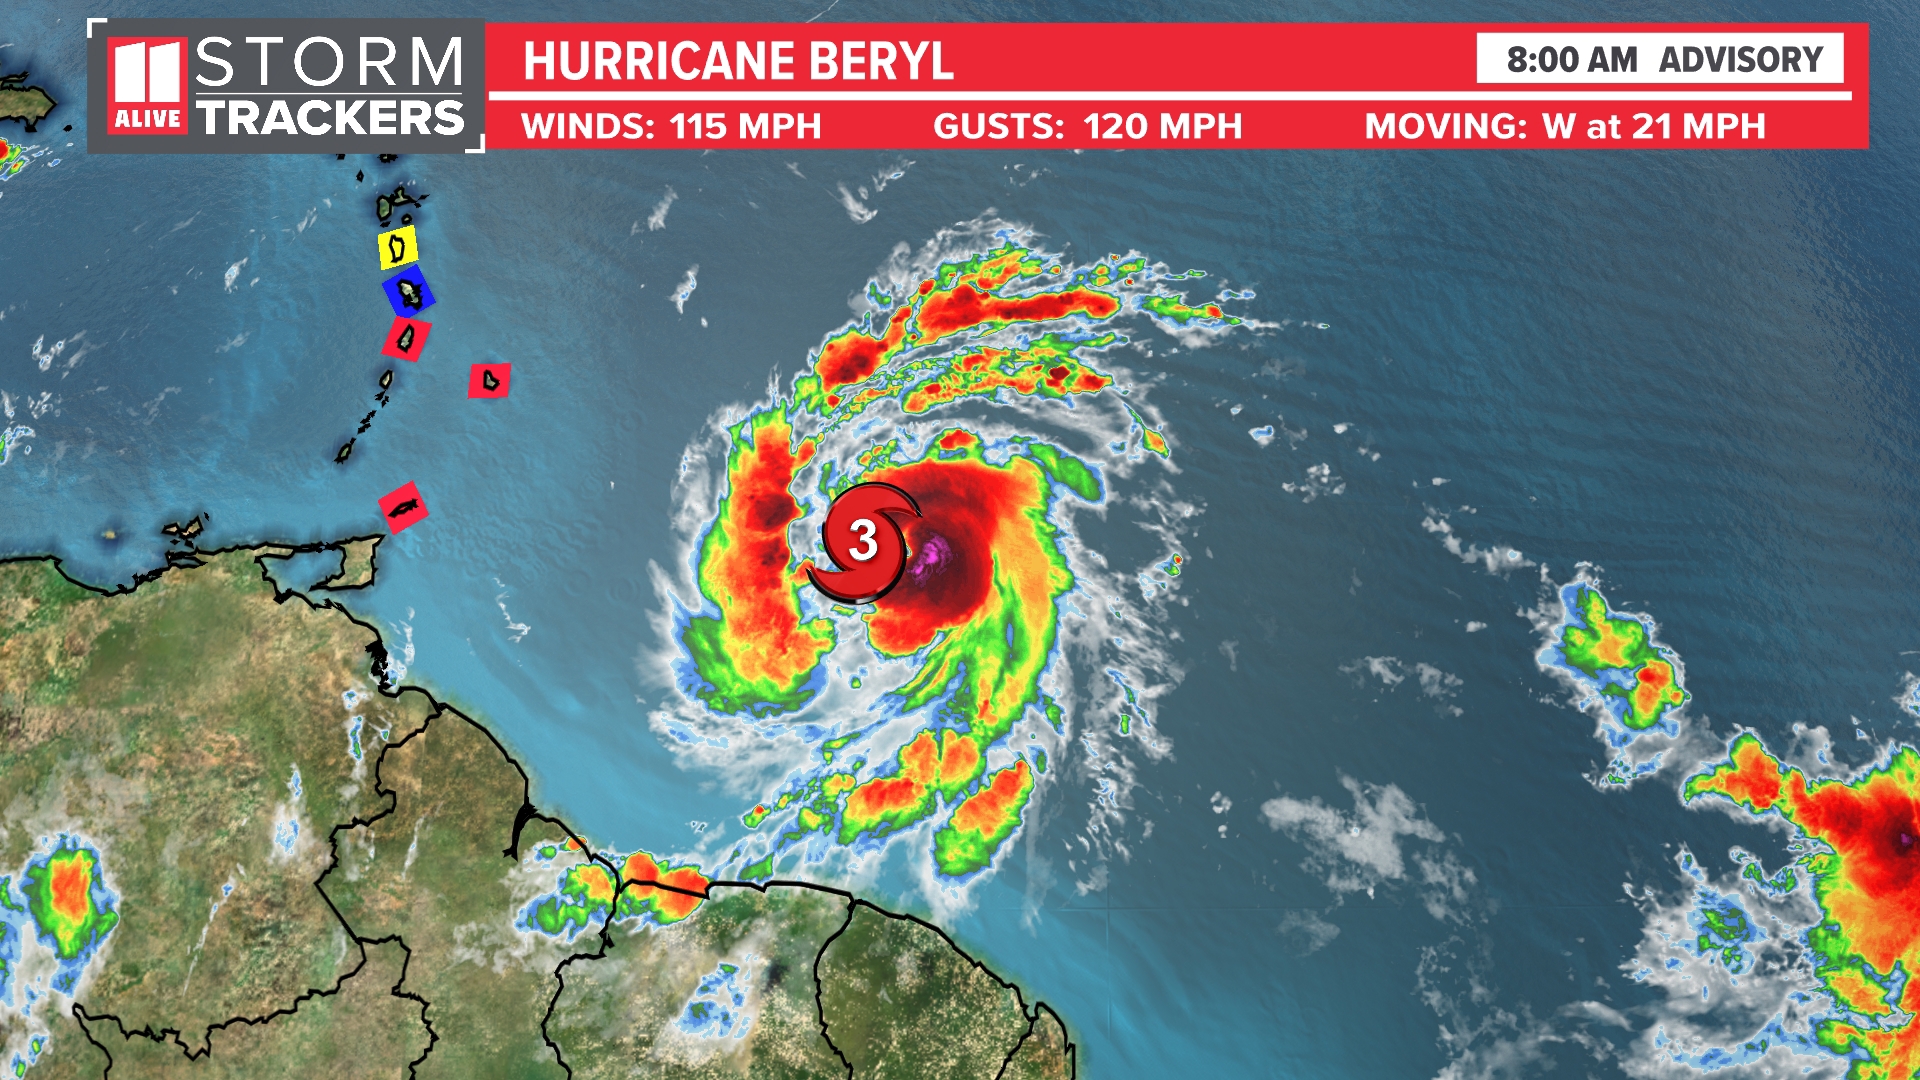 Beryl is now a category 3 hurricane.